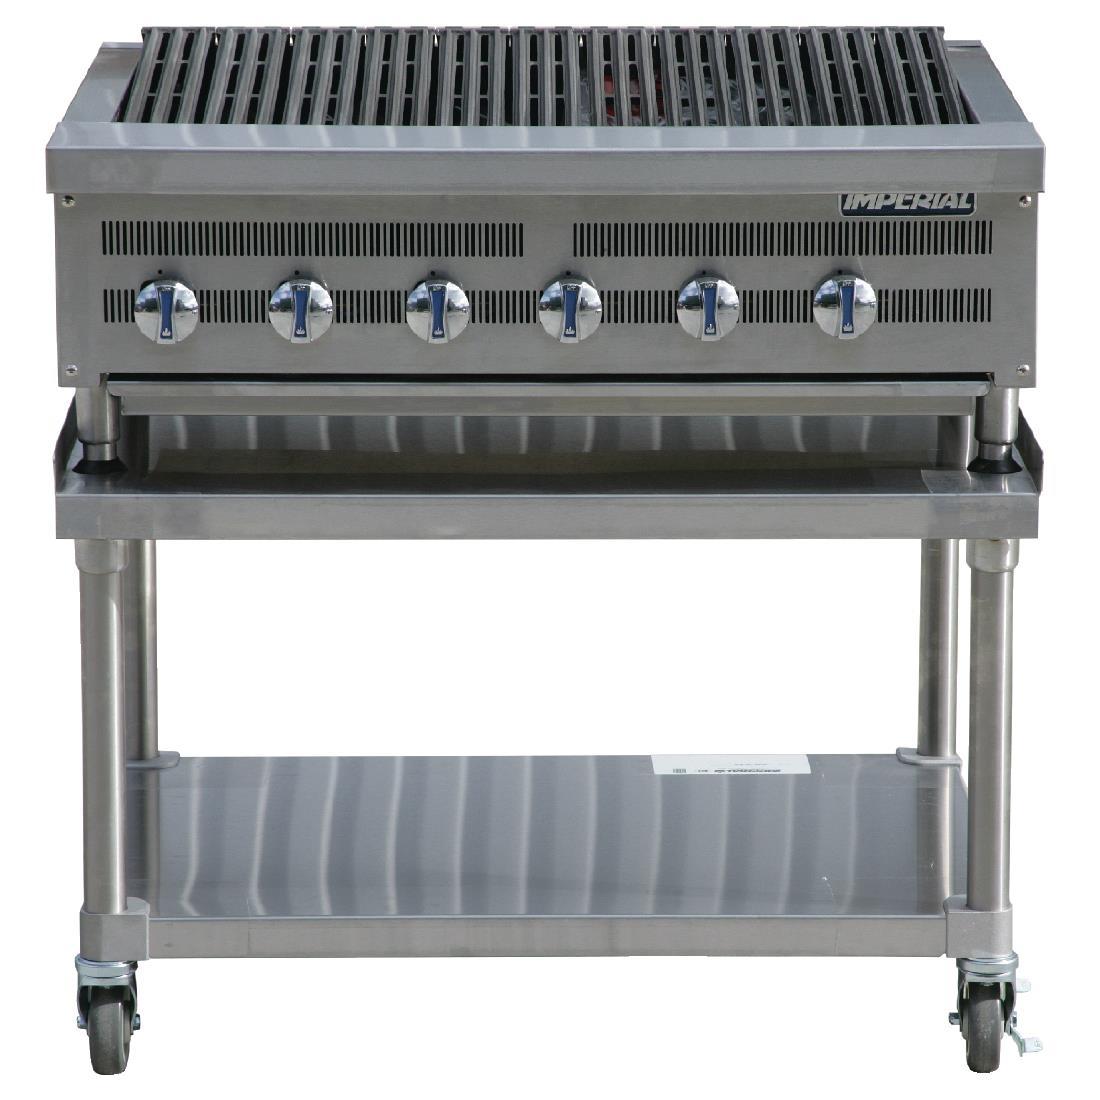 Imperial Radiant Natural Gas Chargrill IRBS-36-NG - CE362-N  - 2